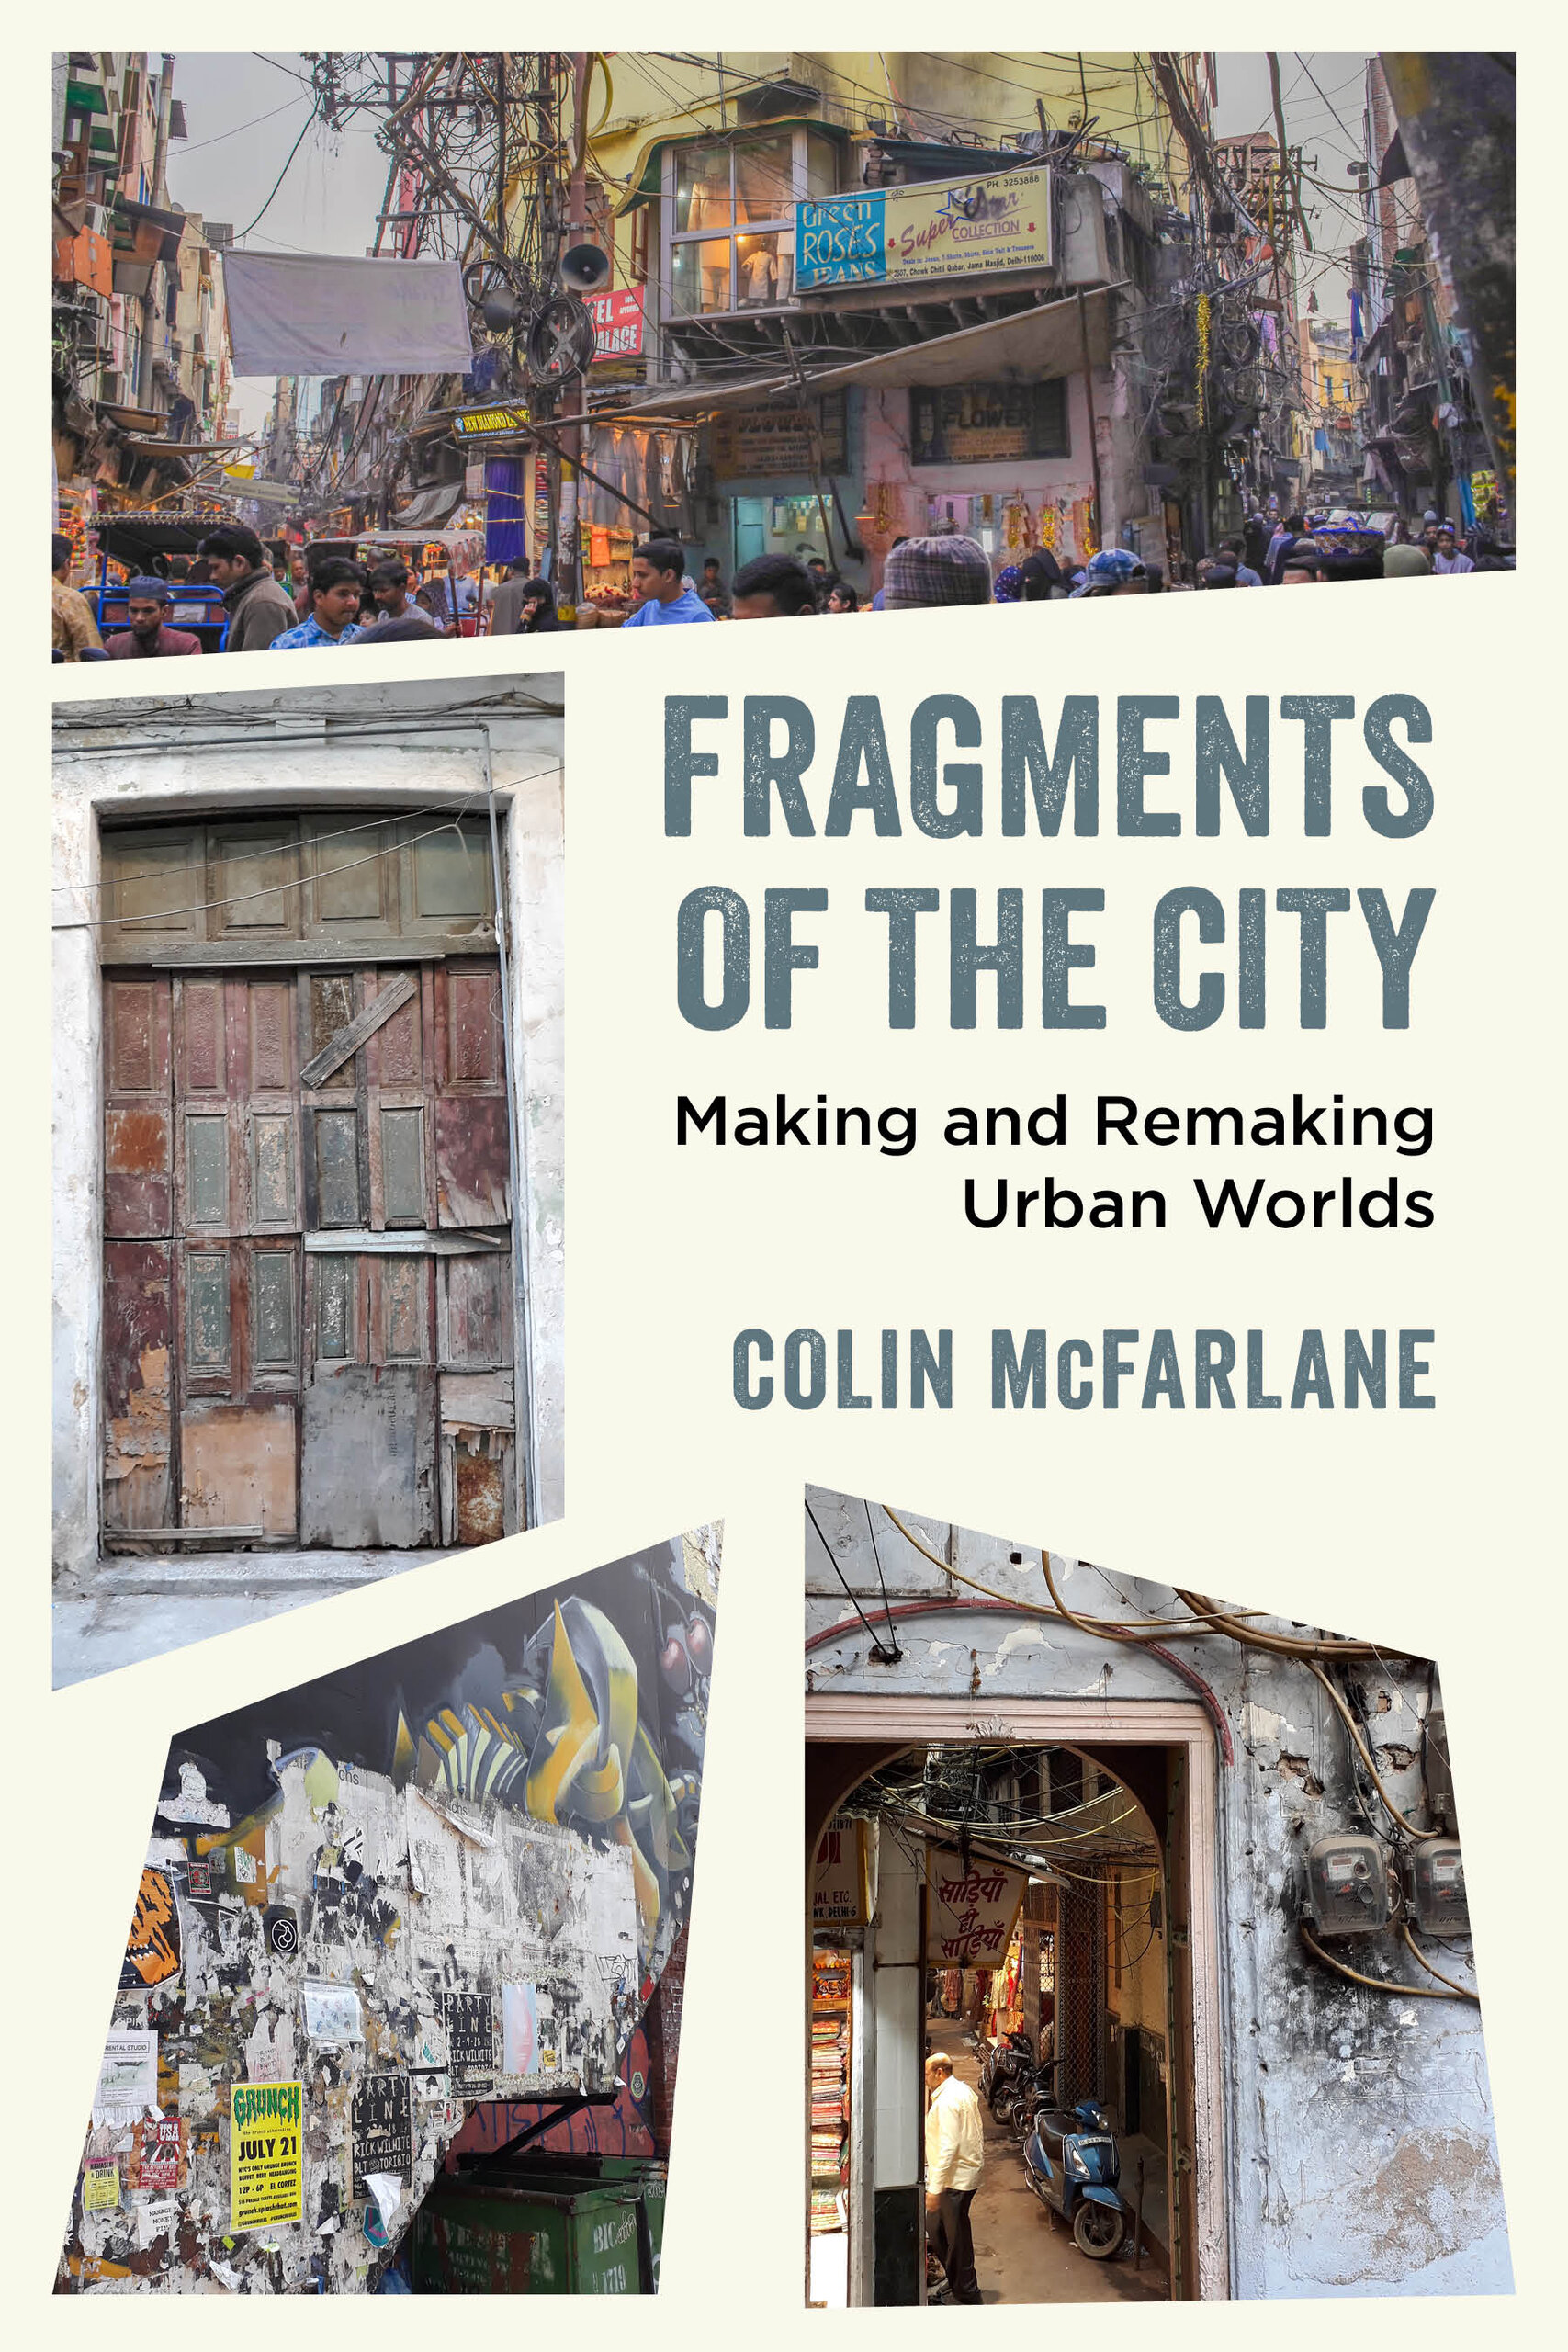 Episode 52 – Book Review Roundtable: Fragments of the City: Making and Remaking Urban Worlds